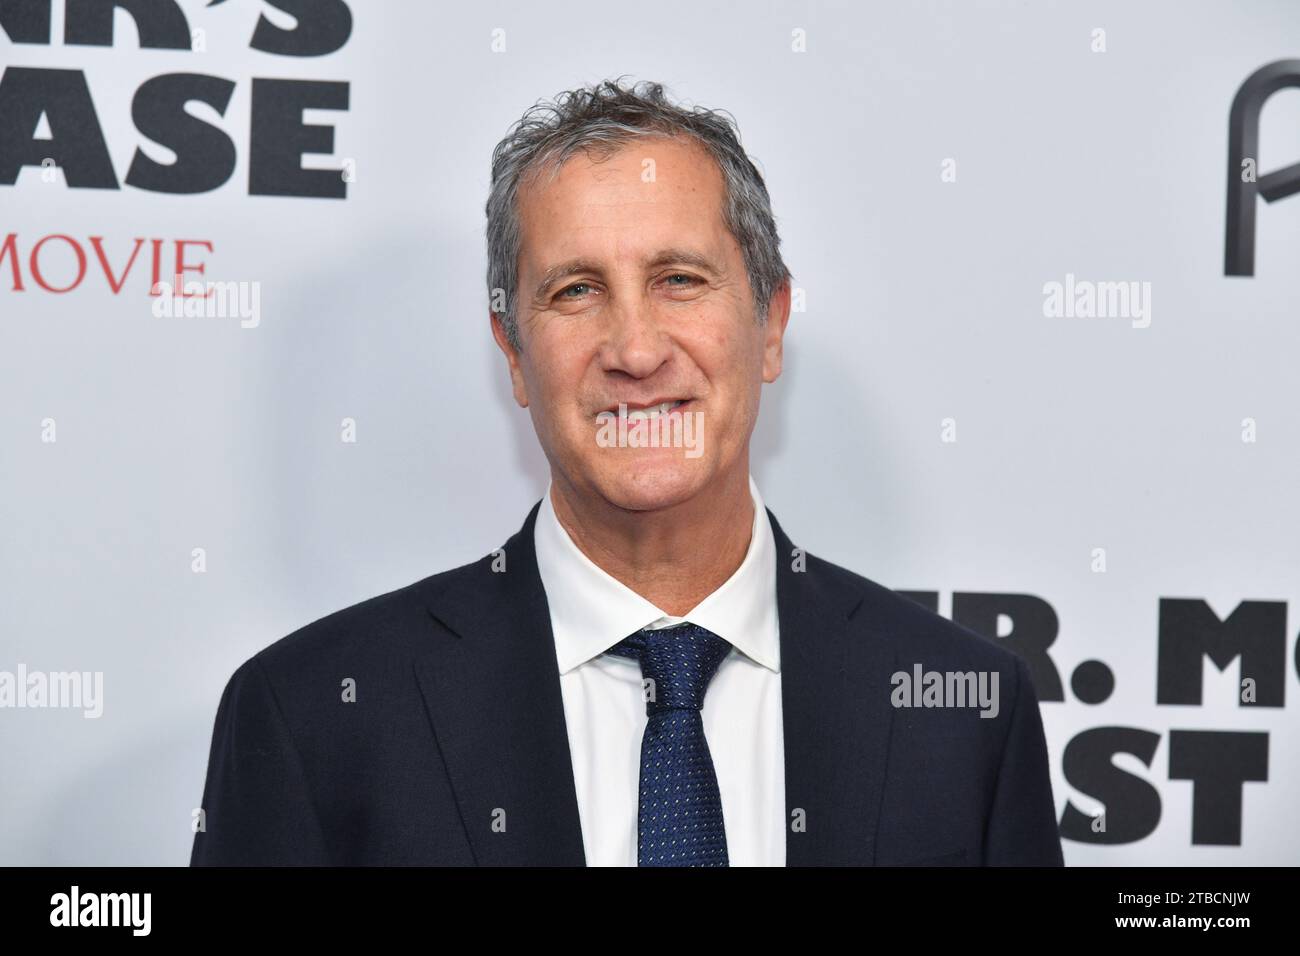 Photo by: NDZ/STAR MAX/IPx 2023 12/5/23 Randy Zisk at the premiere of 'Mr. Monk's Last Case: A Monk Movie' on December 5, 2023 in New York City. Stock Photo